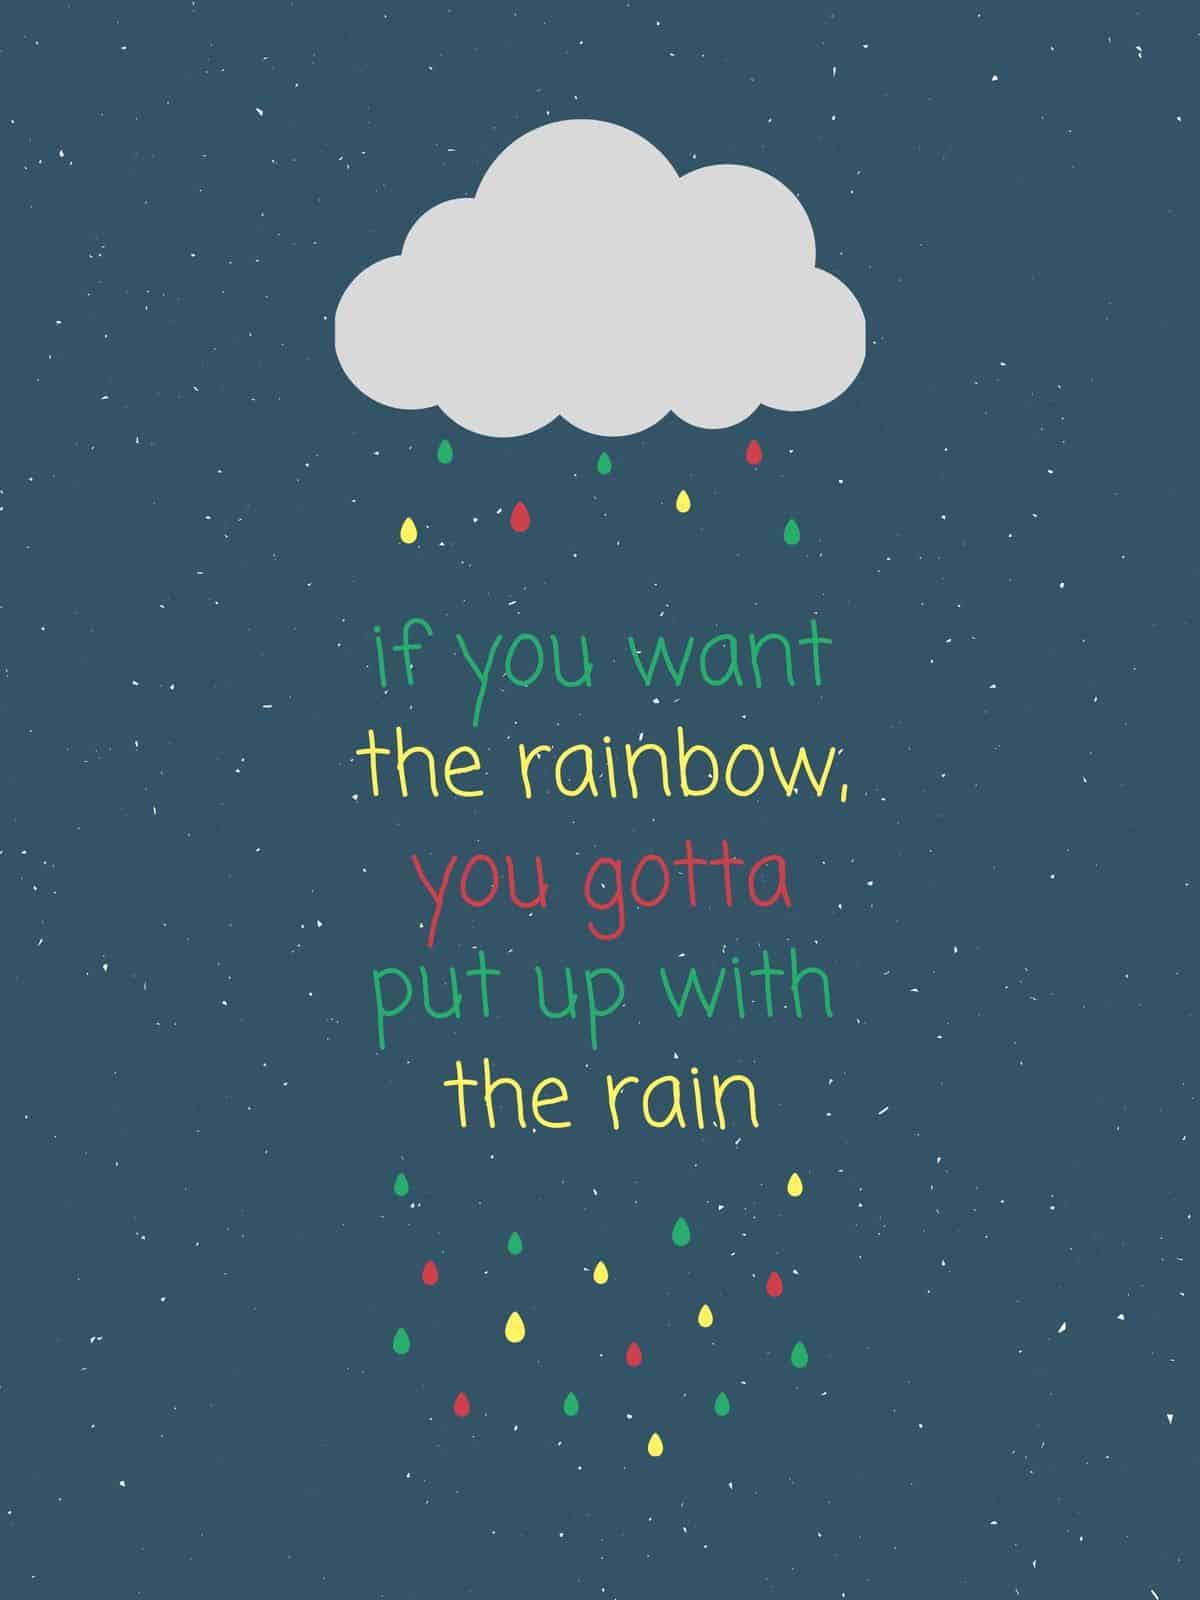 if you want the rainbow, you've got to put up with the rain